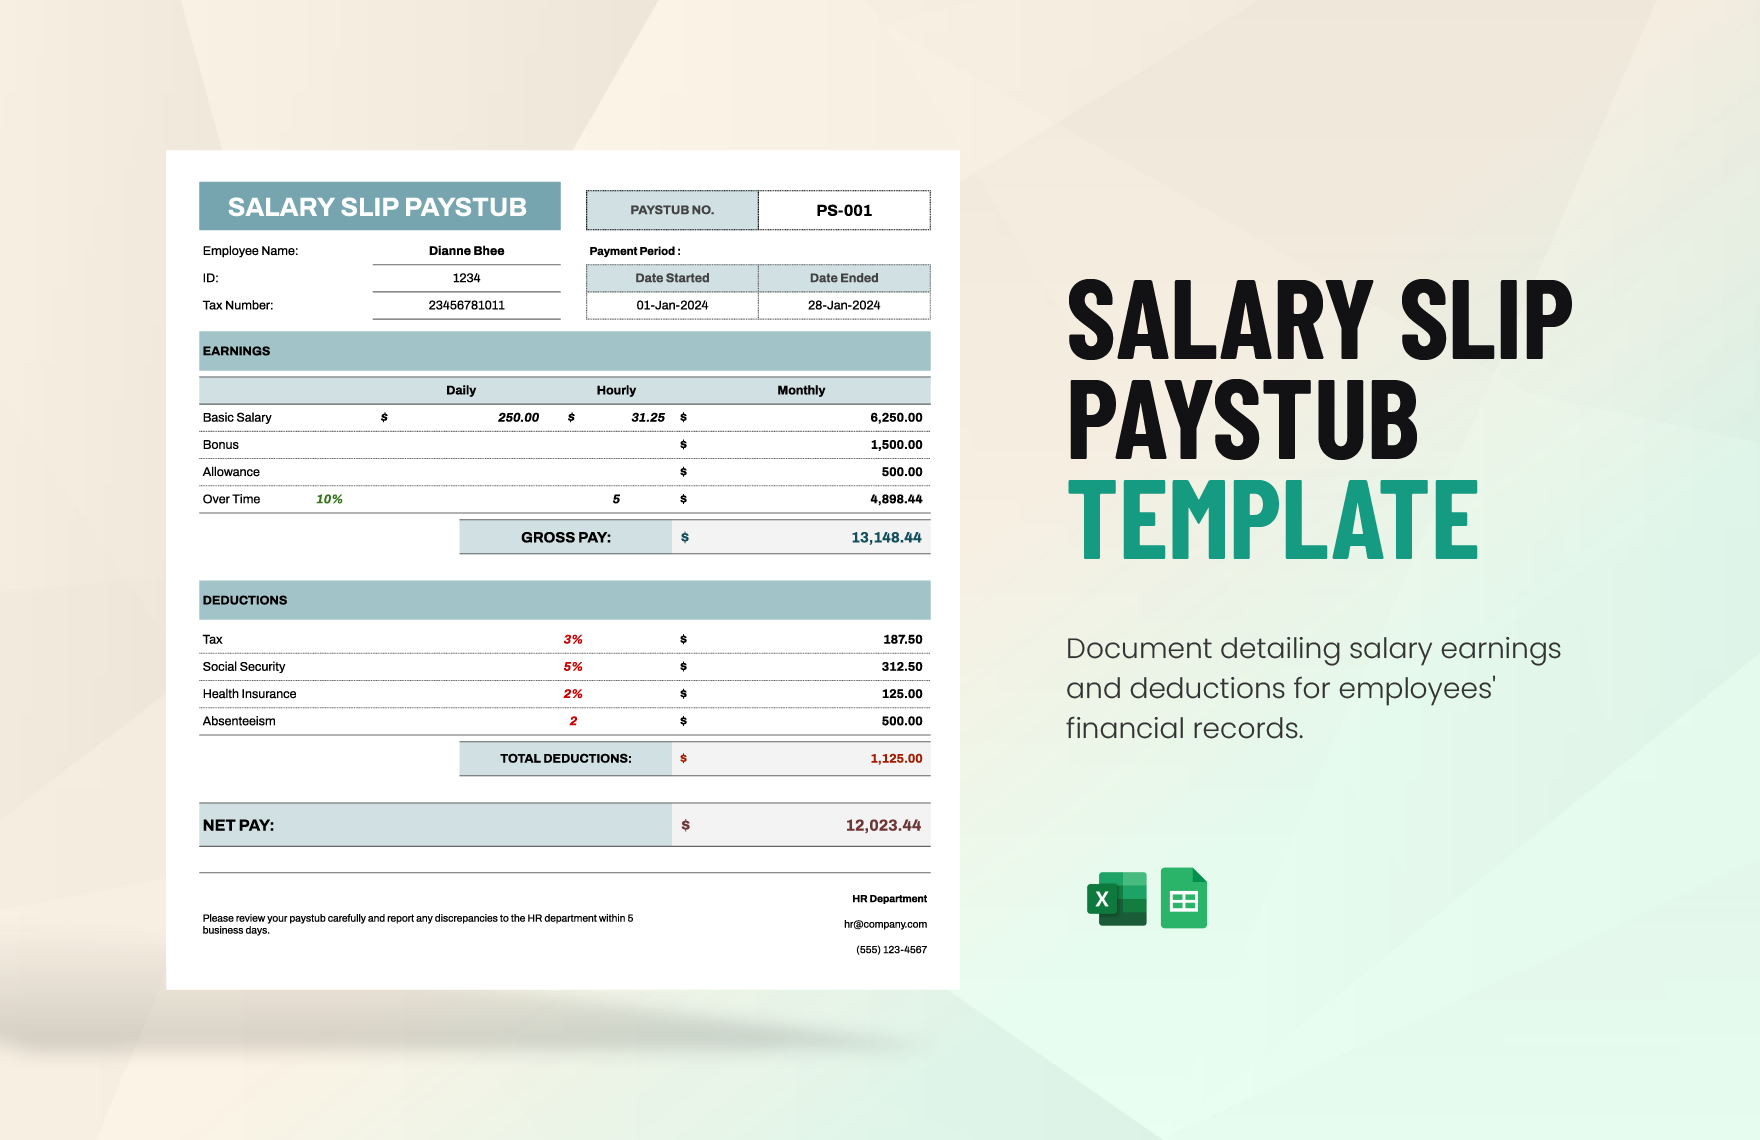 Salary Slip Paystub Template in Excel, Google Sheets